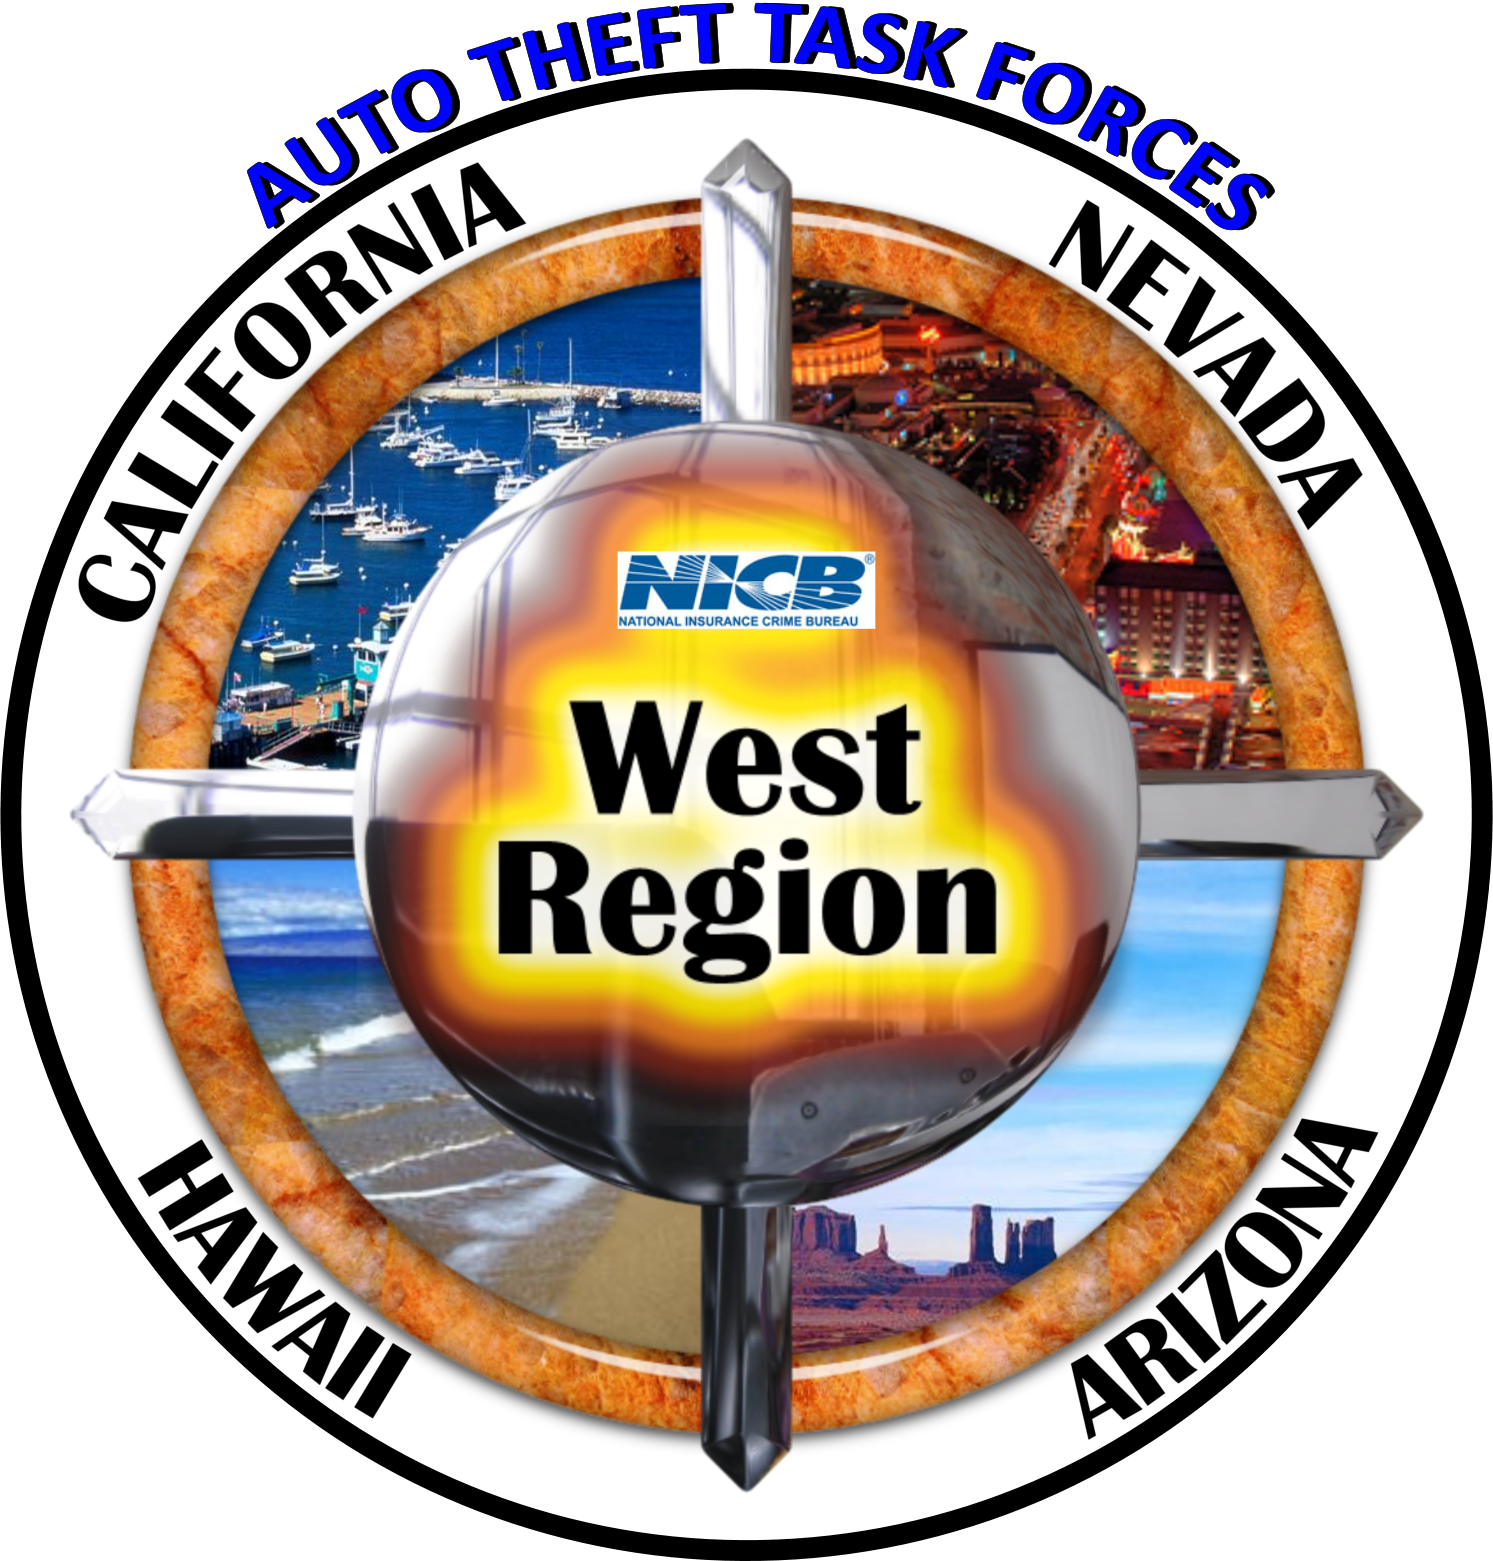 Auto Theft Task Forces in the West Region